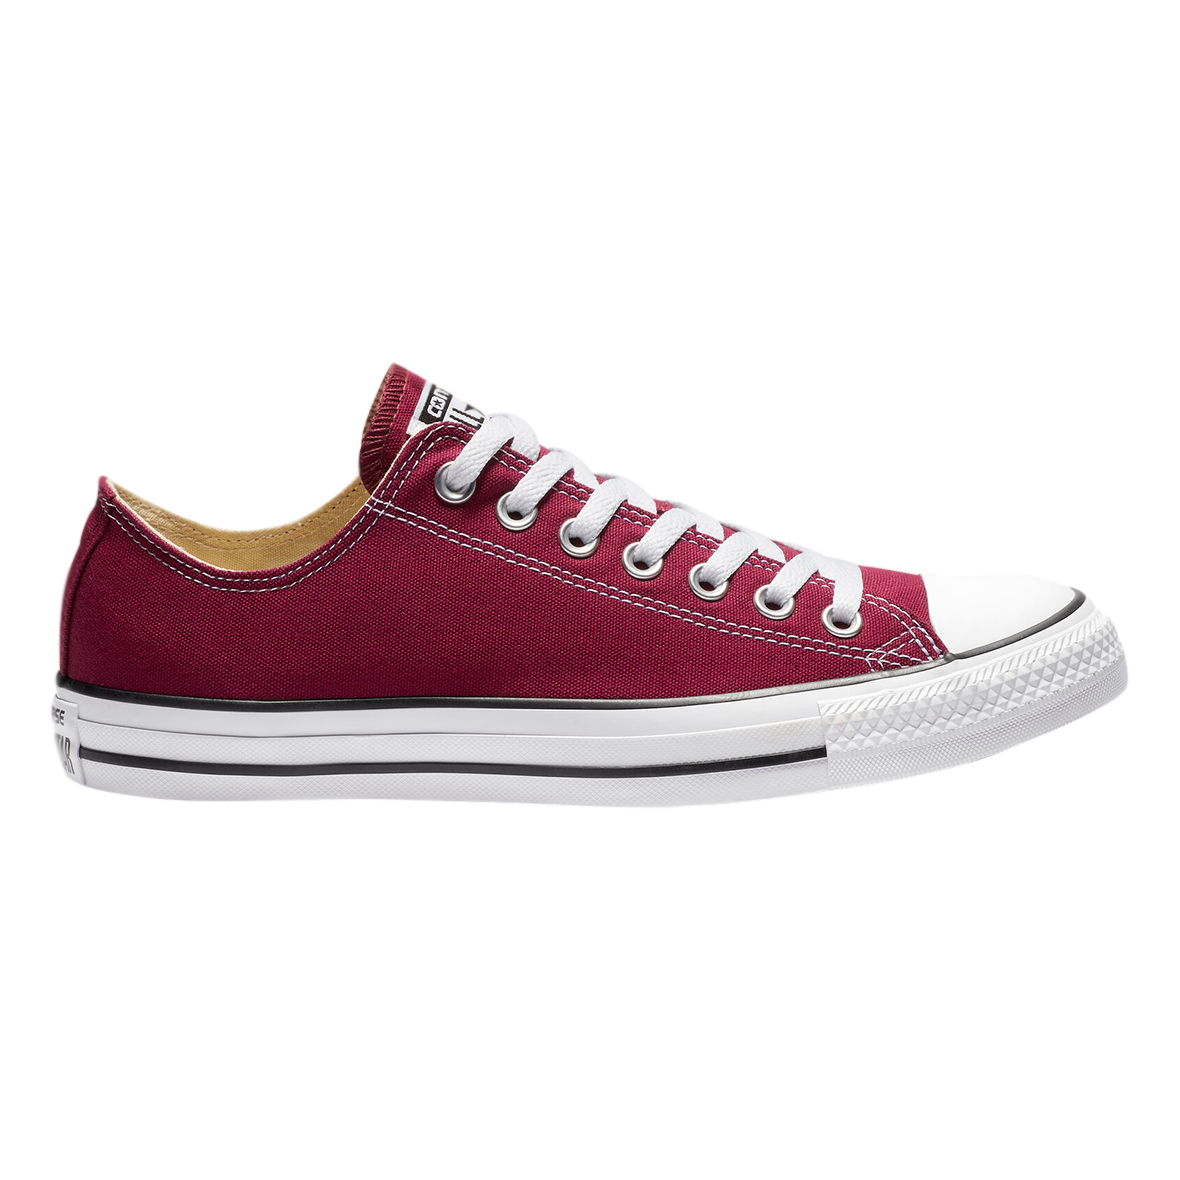 CONVERSE CHUCK TAYLR ALL STAR UNISEX COLOR